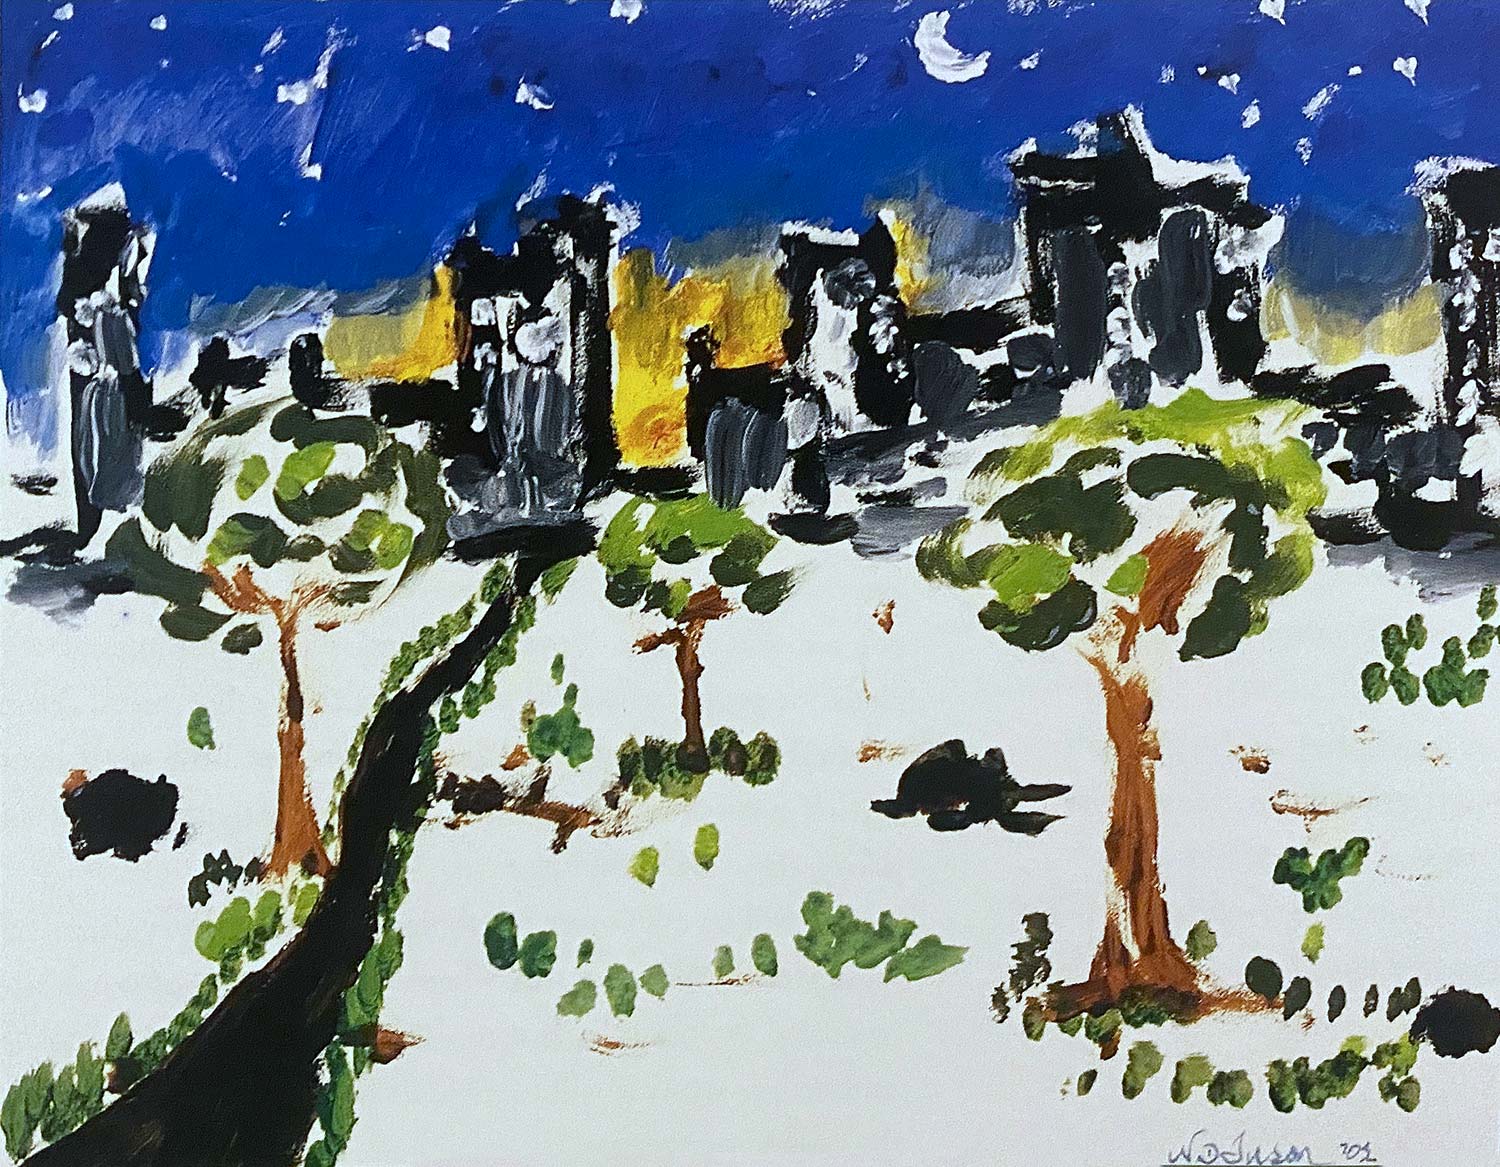 Impressionist-style painting of trees of Central Park and the city skyline under the starry night sky.